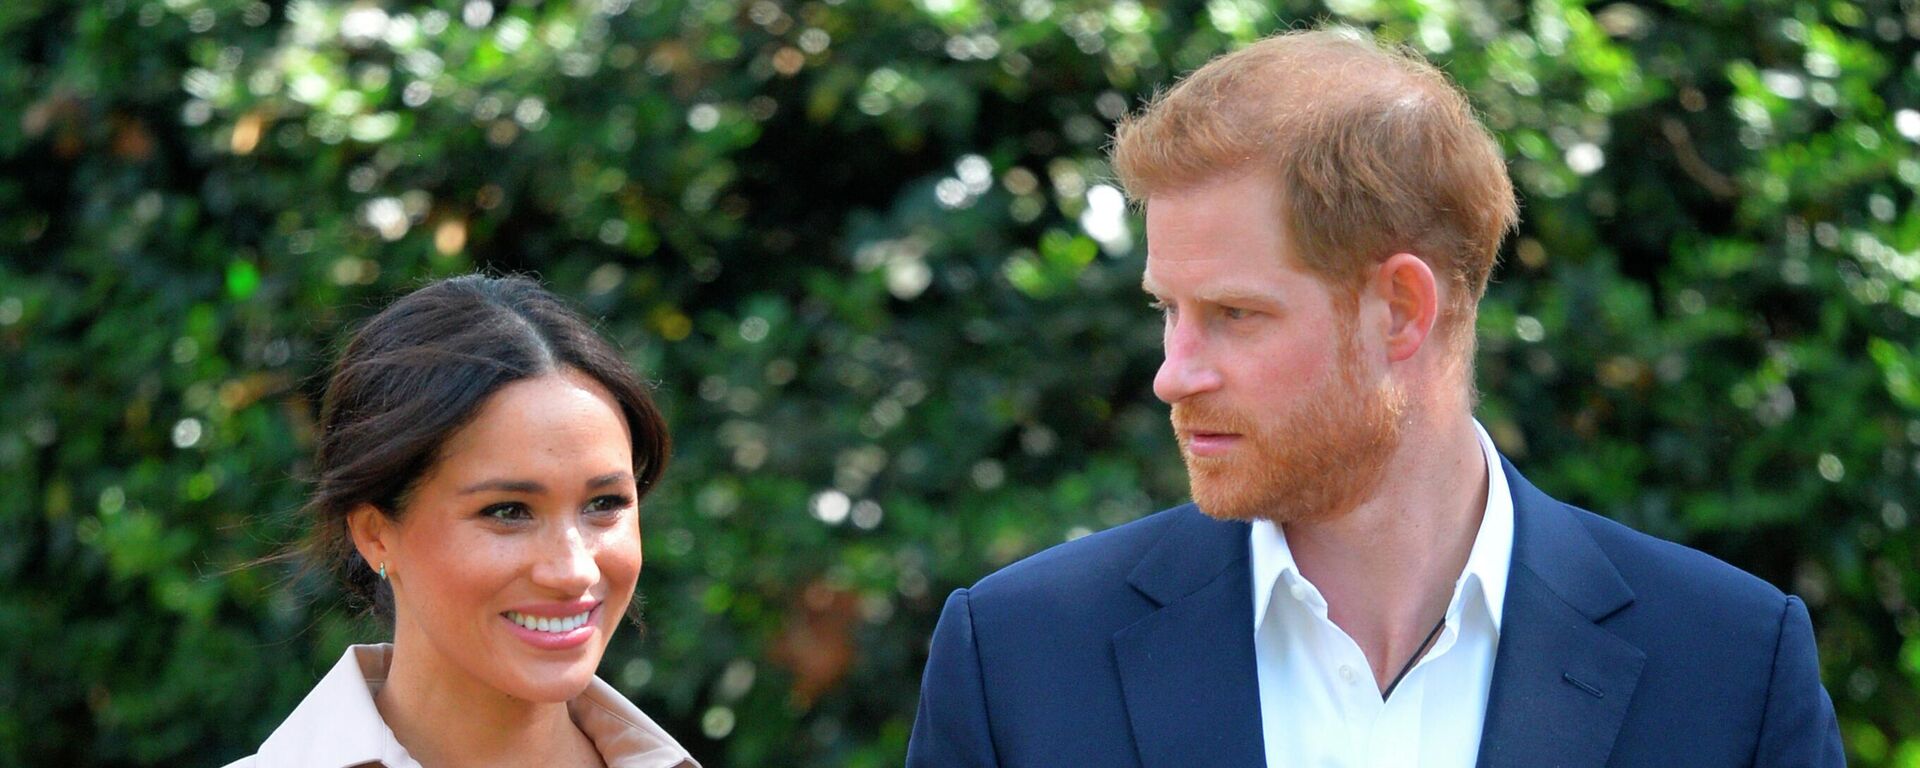 FILE - In this Oct. 2, 2019, file photo, Britain's Prince Harry and Meghan Markle appear at the Creative Industries and Business Reception at the British High Commissioner's residence in Johannesburg.  - Sputnik International, 1920, 06.12.2022